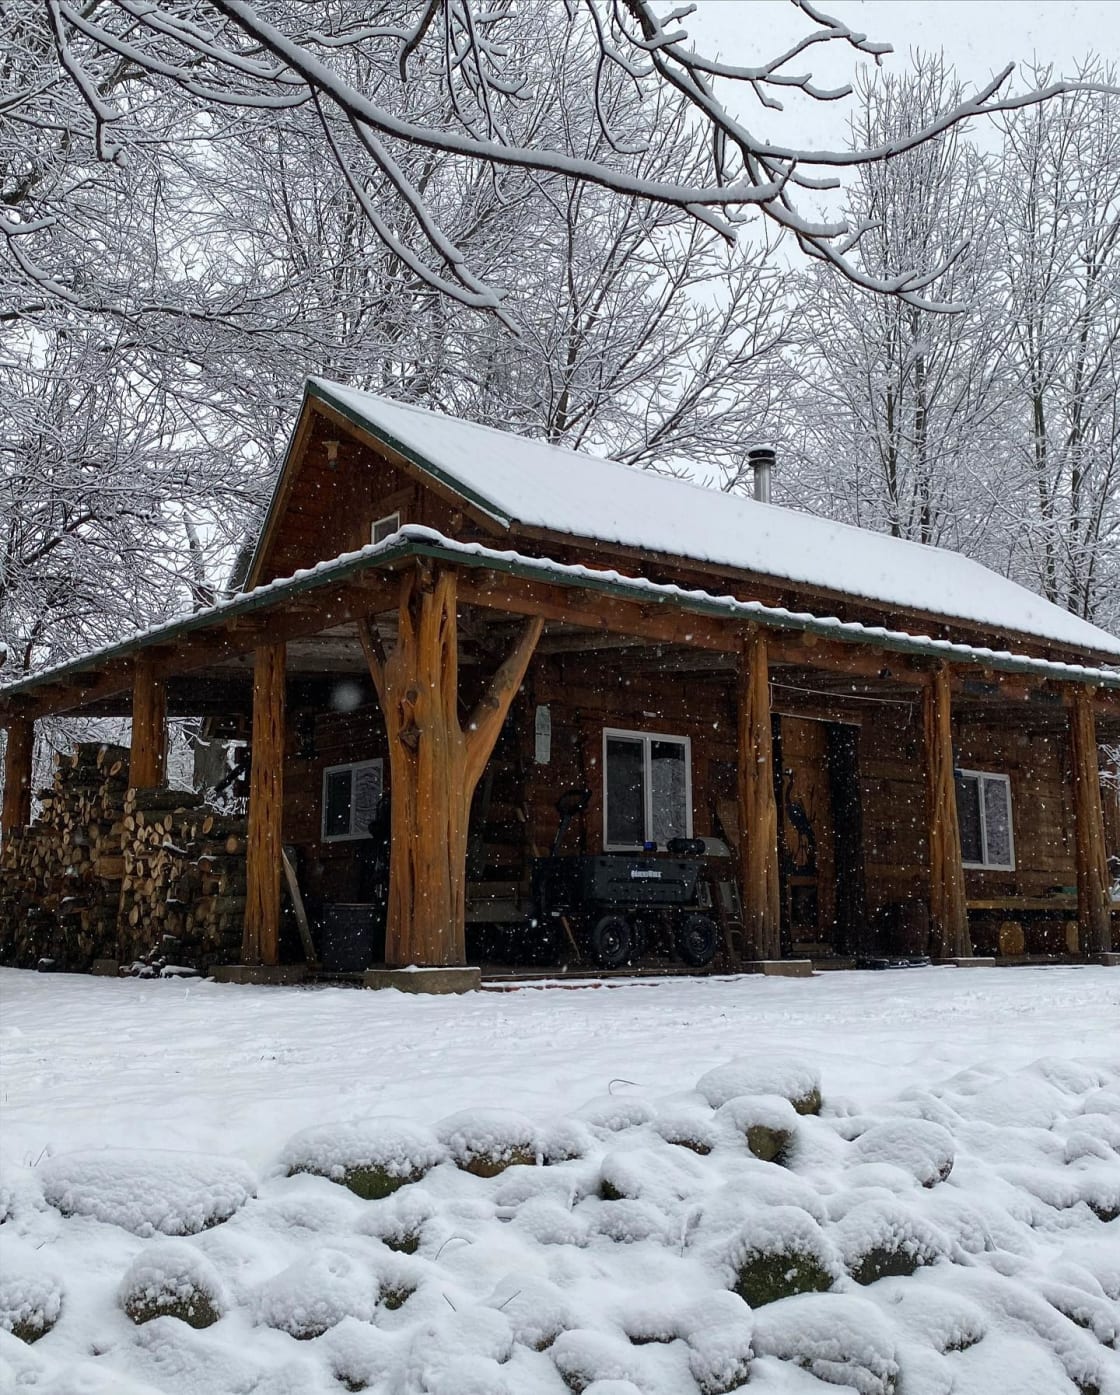 Snowmageddon picture of cabin today, February 2nd, 2022.